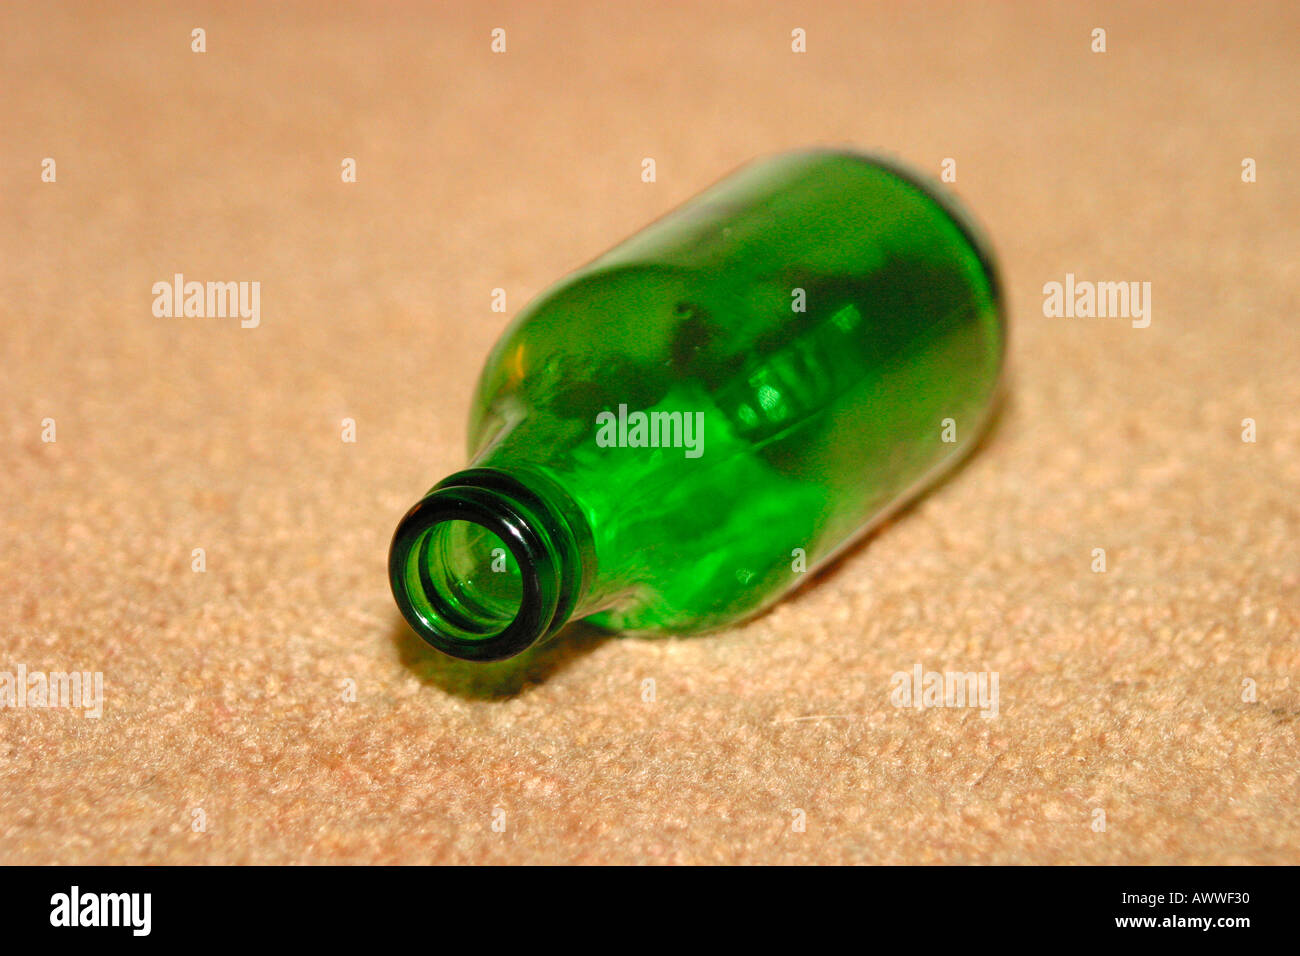 Empty beer bottle discarded on carpeted floor Stock Photo